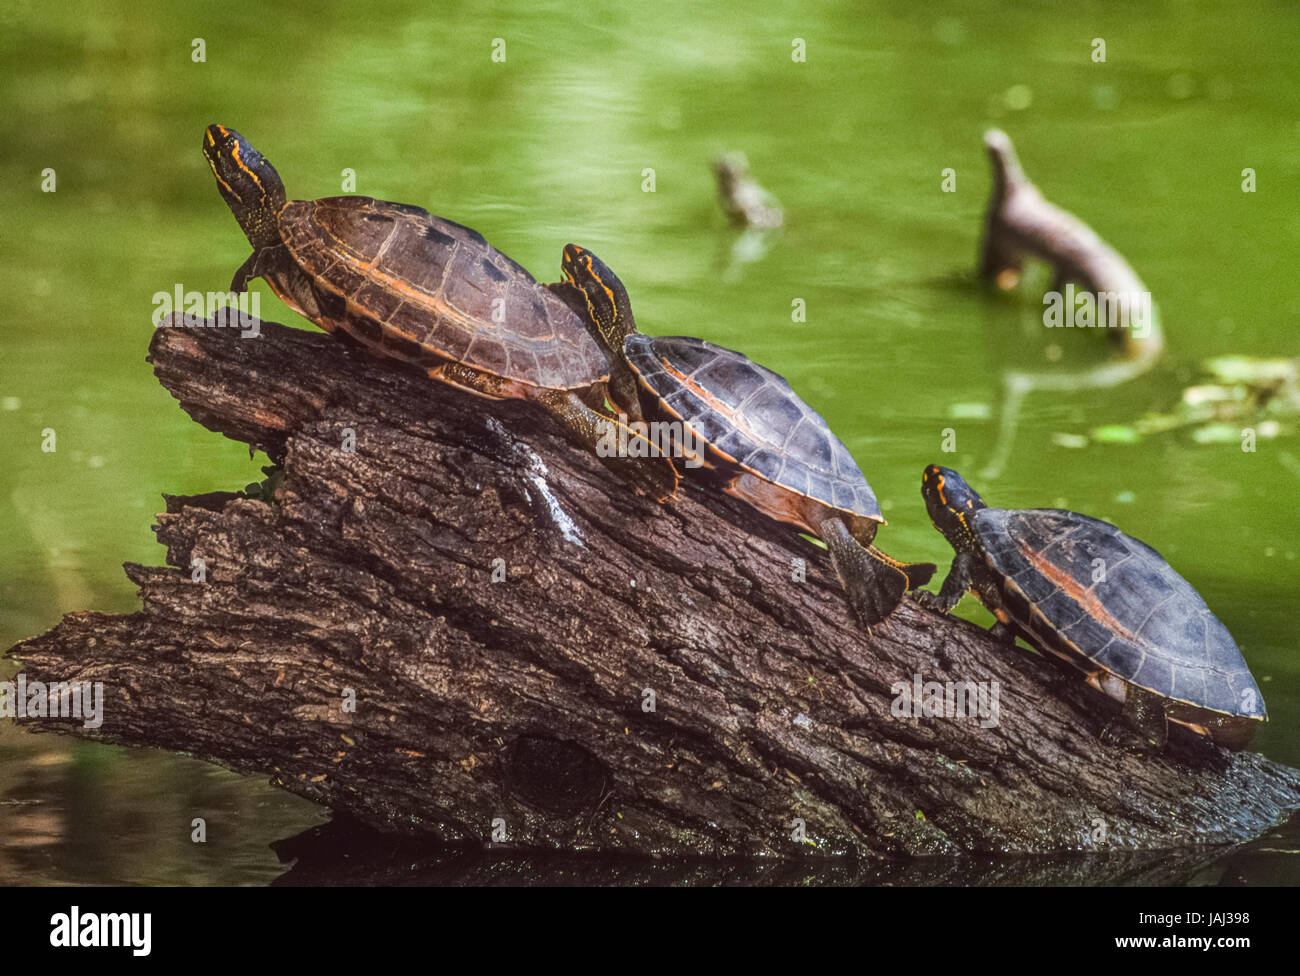 Crowned river turtle also known as  Brahminy river turtle, (Hardella thurjii), Keoladeo Ghana National Park, Bharatpur, Rajasthan, India Stock Photo